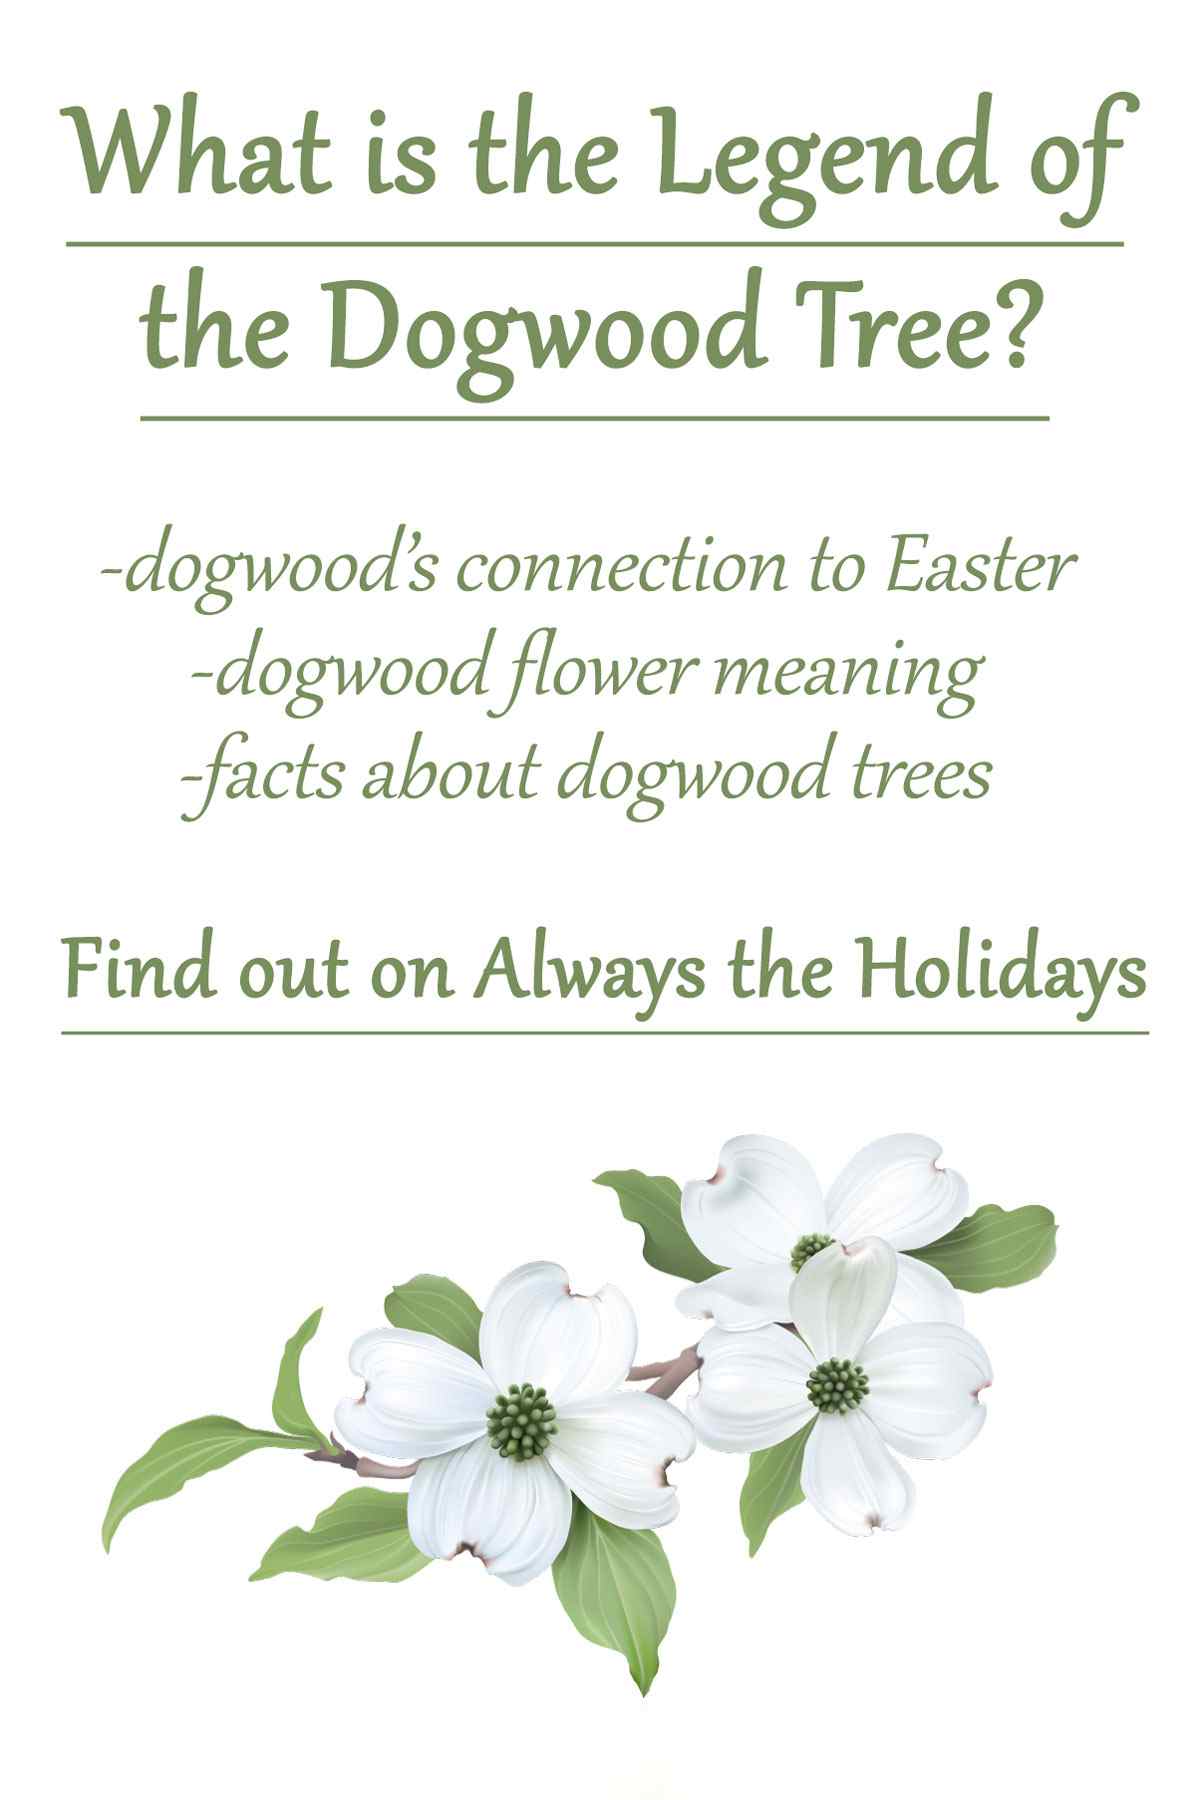 A white background with three illustrated dogwood flowers at the bottom, and a text overlay advertising the legend of the dogwood tree, the dogwood flower meaning and facts about dogwood trees above it.